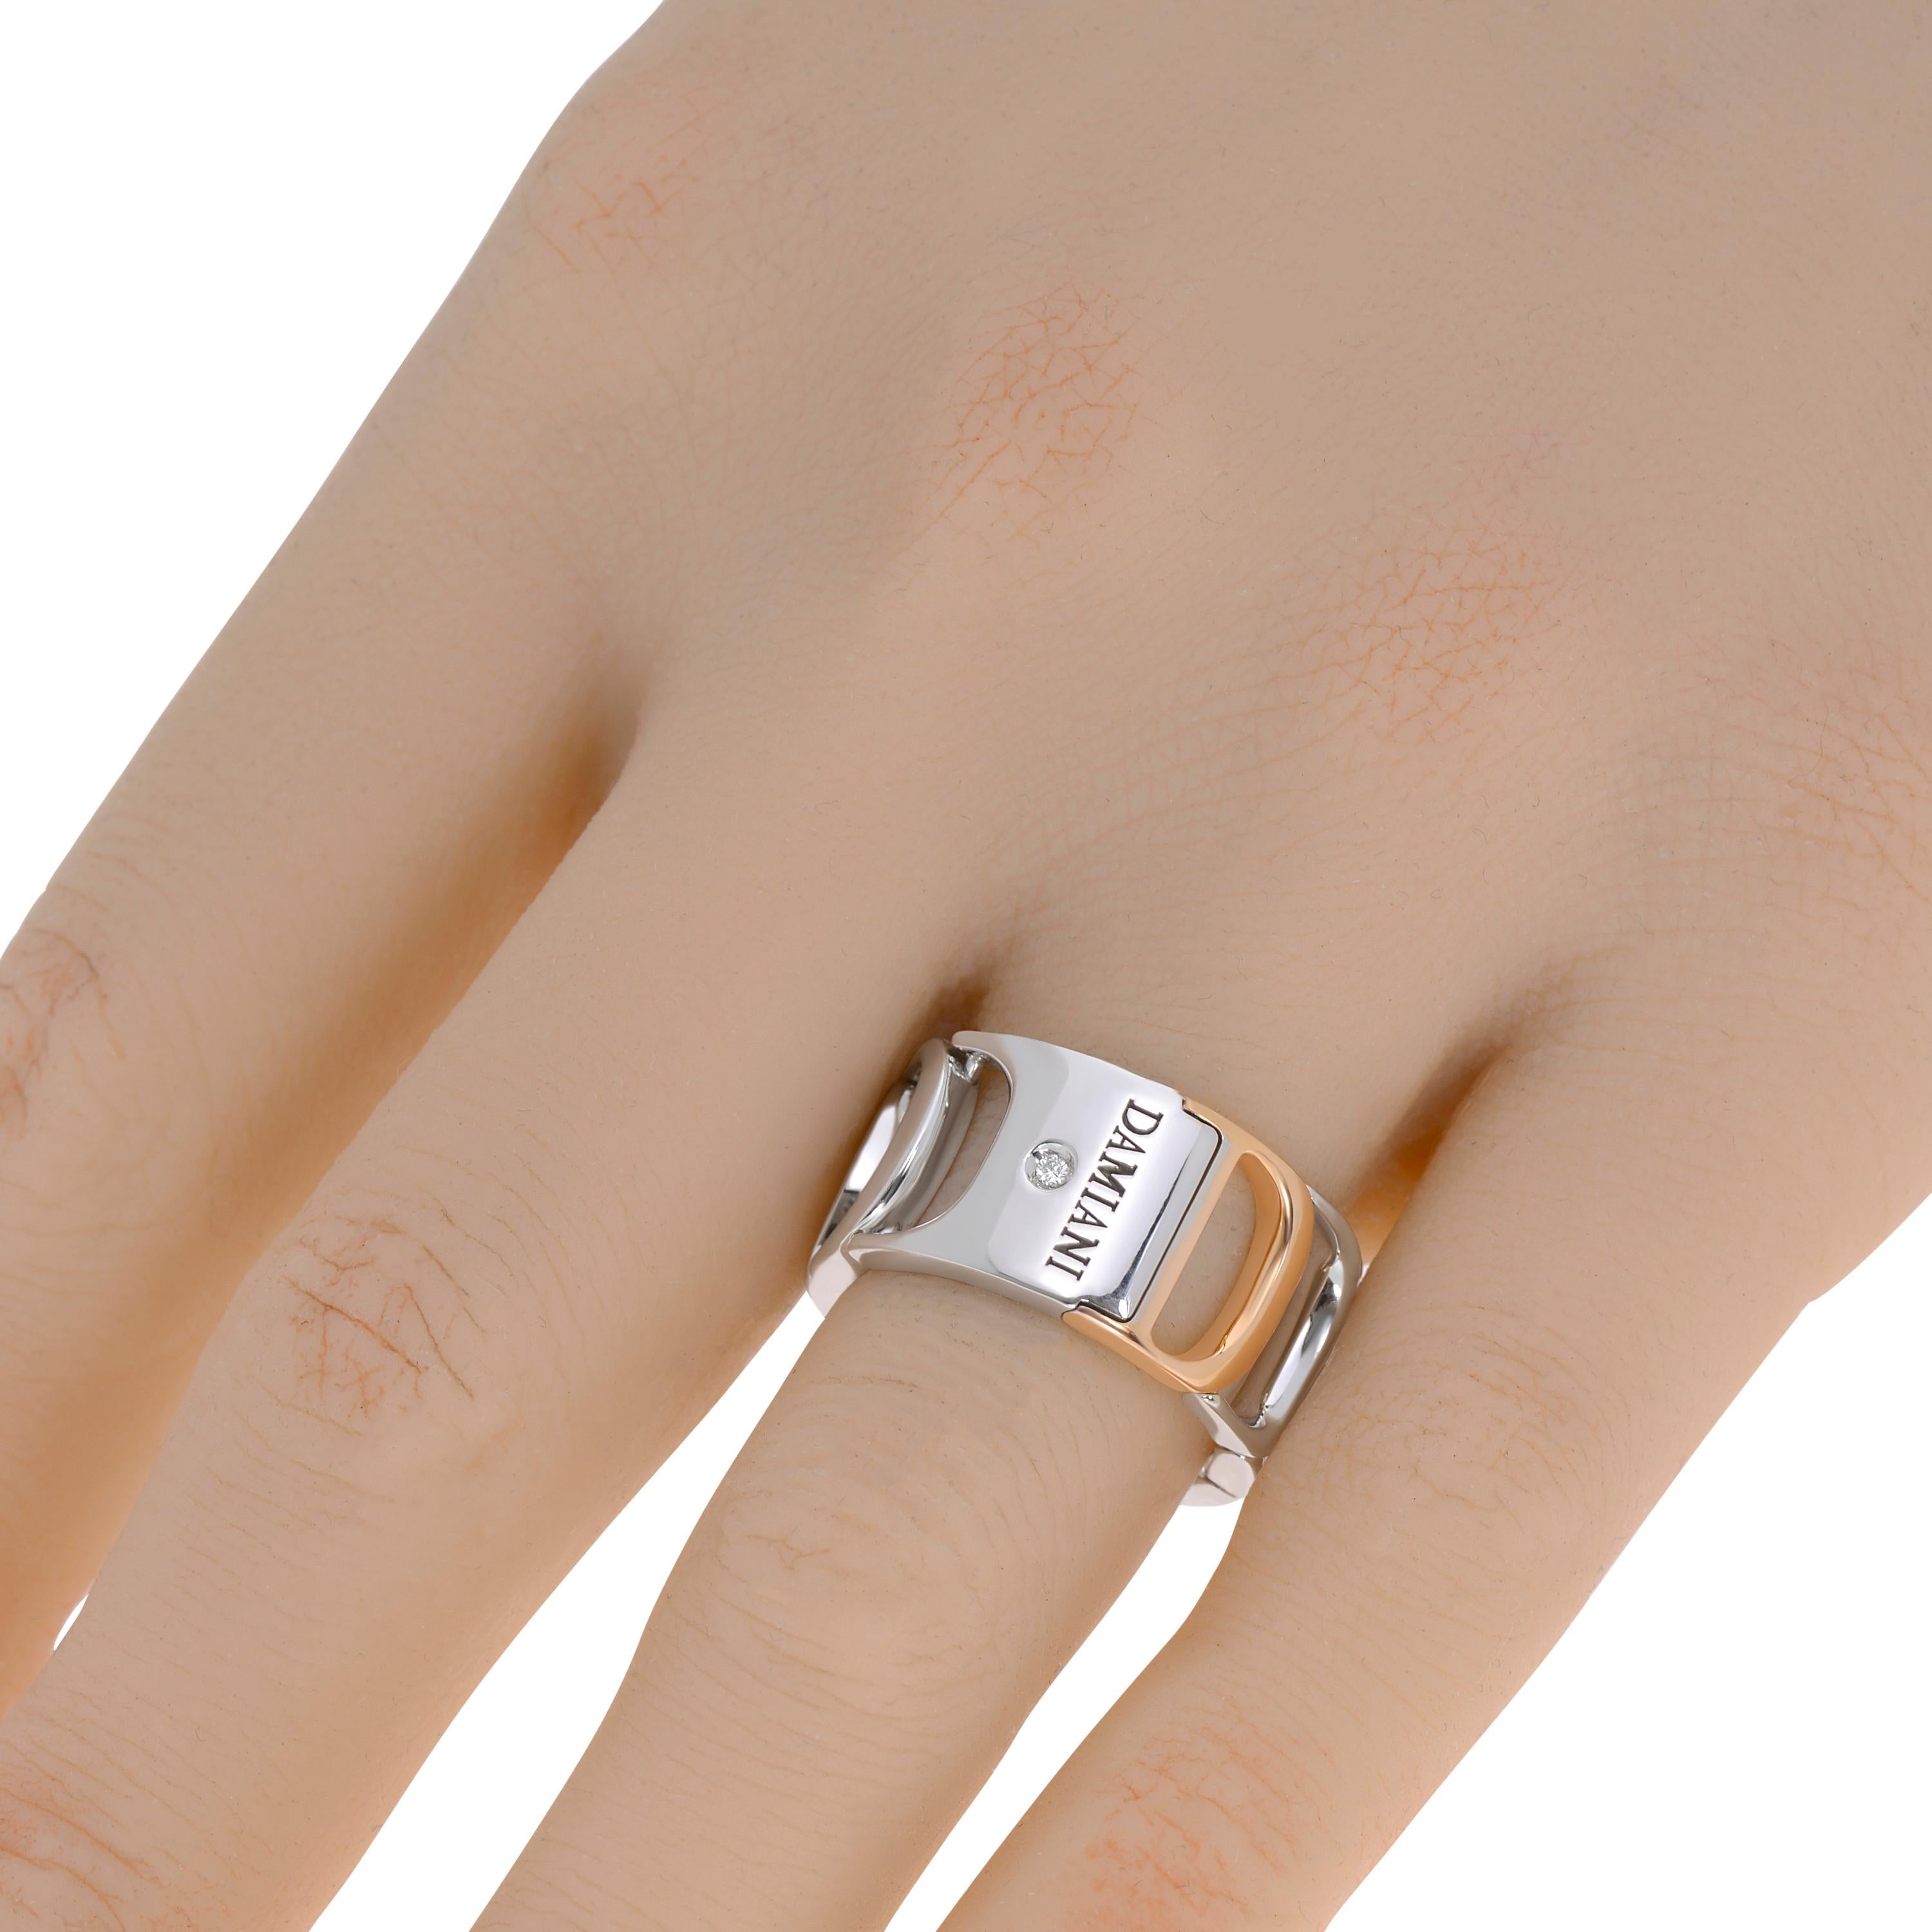 This distinctive Damiani 18K White & Rose Gold Flexible Ring features a two tone design showcasing the iconic Damiani 